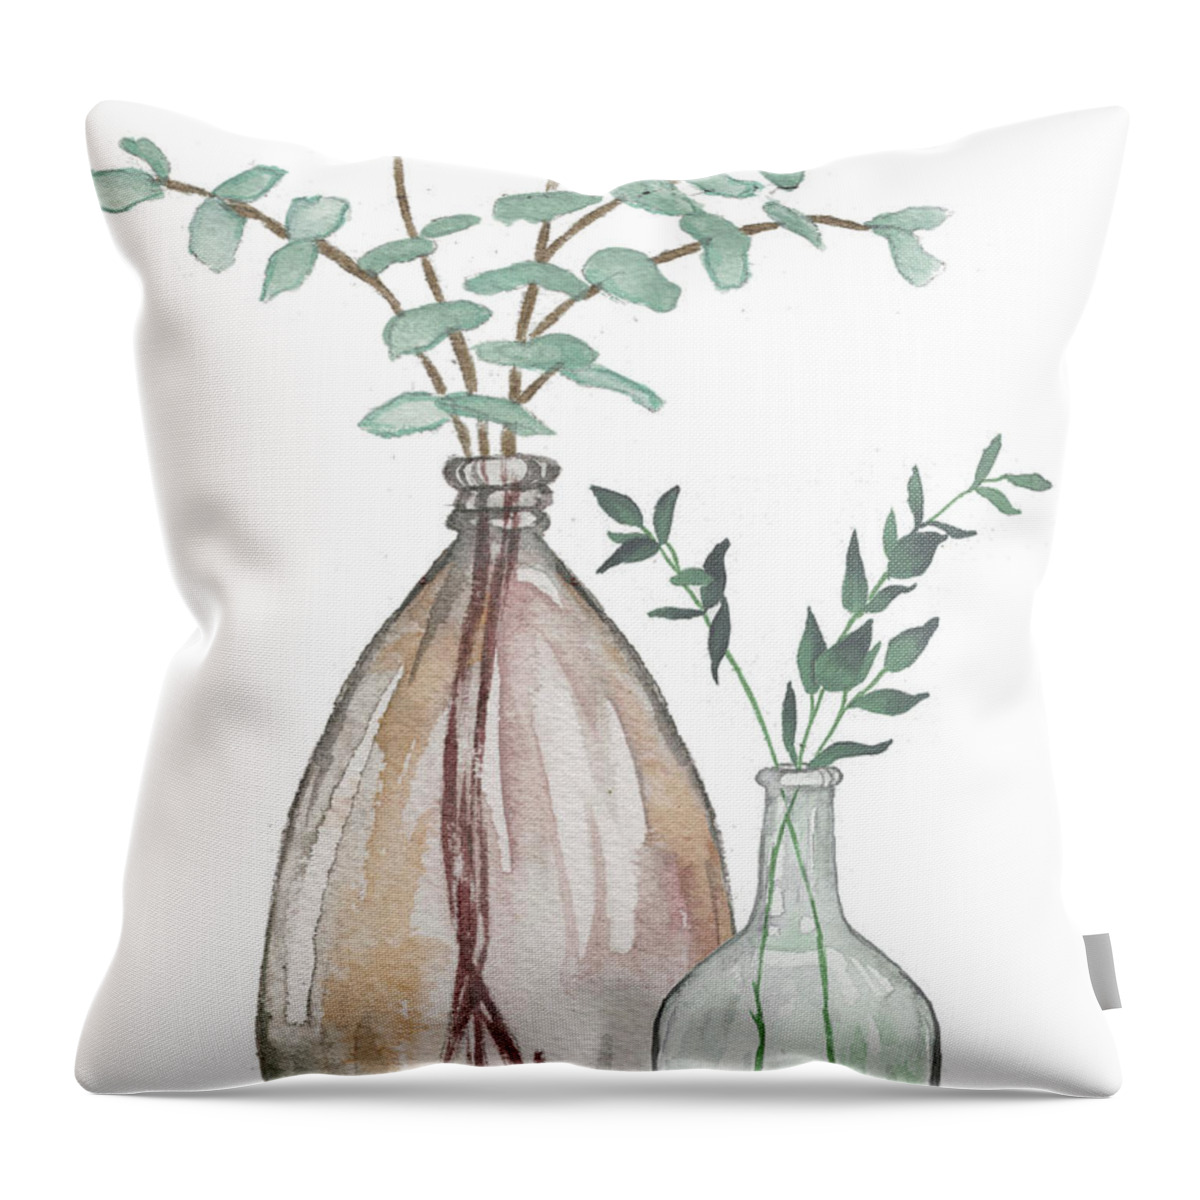 Serenity Throw Pillow featuring the mixed media Serenity Accents IIi by Elizabeth Medley